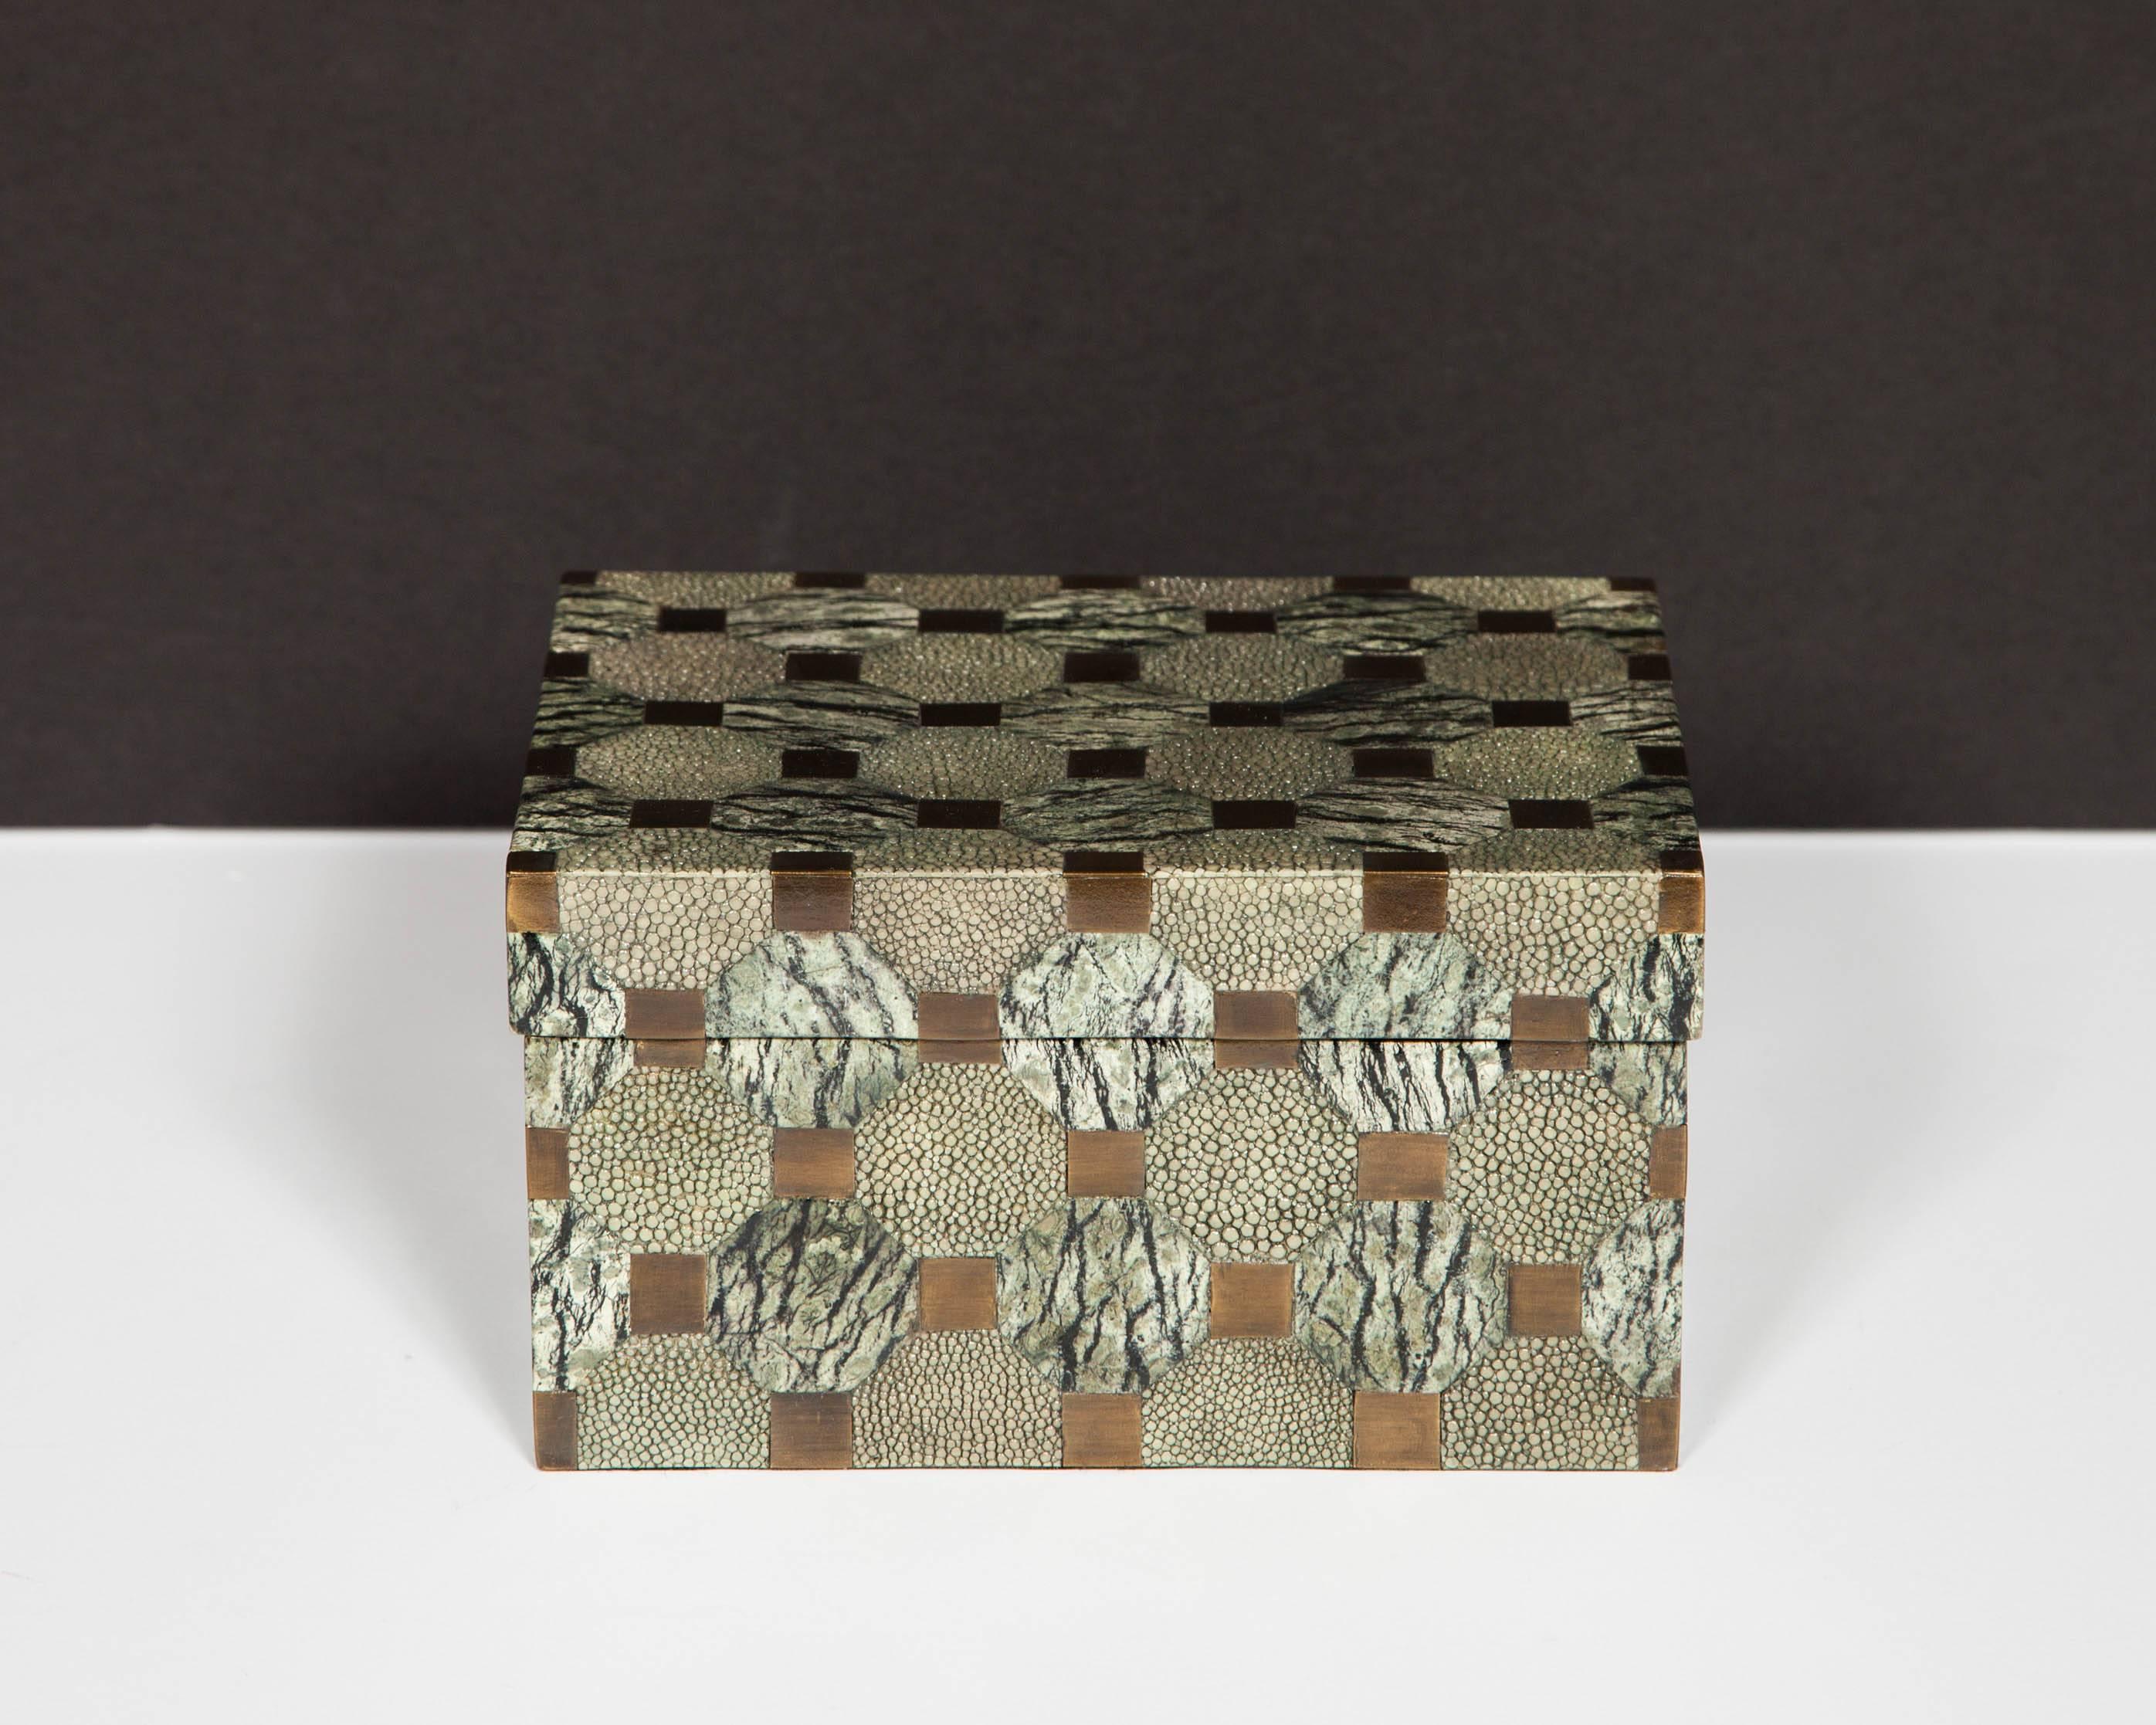 Beautiful handcrafted lidded box with geometric pattern, comprised of alternating octagon shapes of grey shagreen and hand-painted lacquered wood with zebra hued veining. The shapes are separated by bronze square inlays, which contribute to the